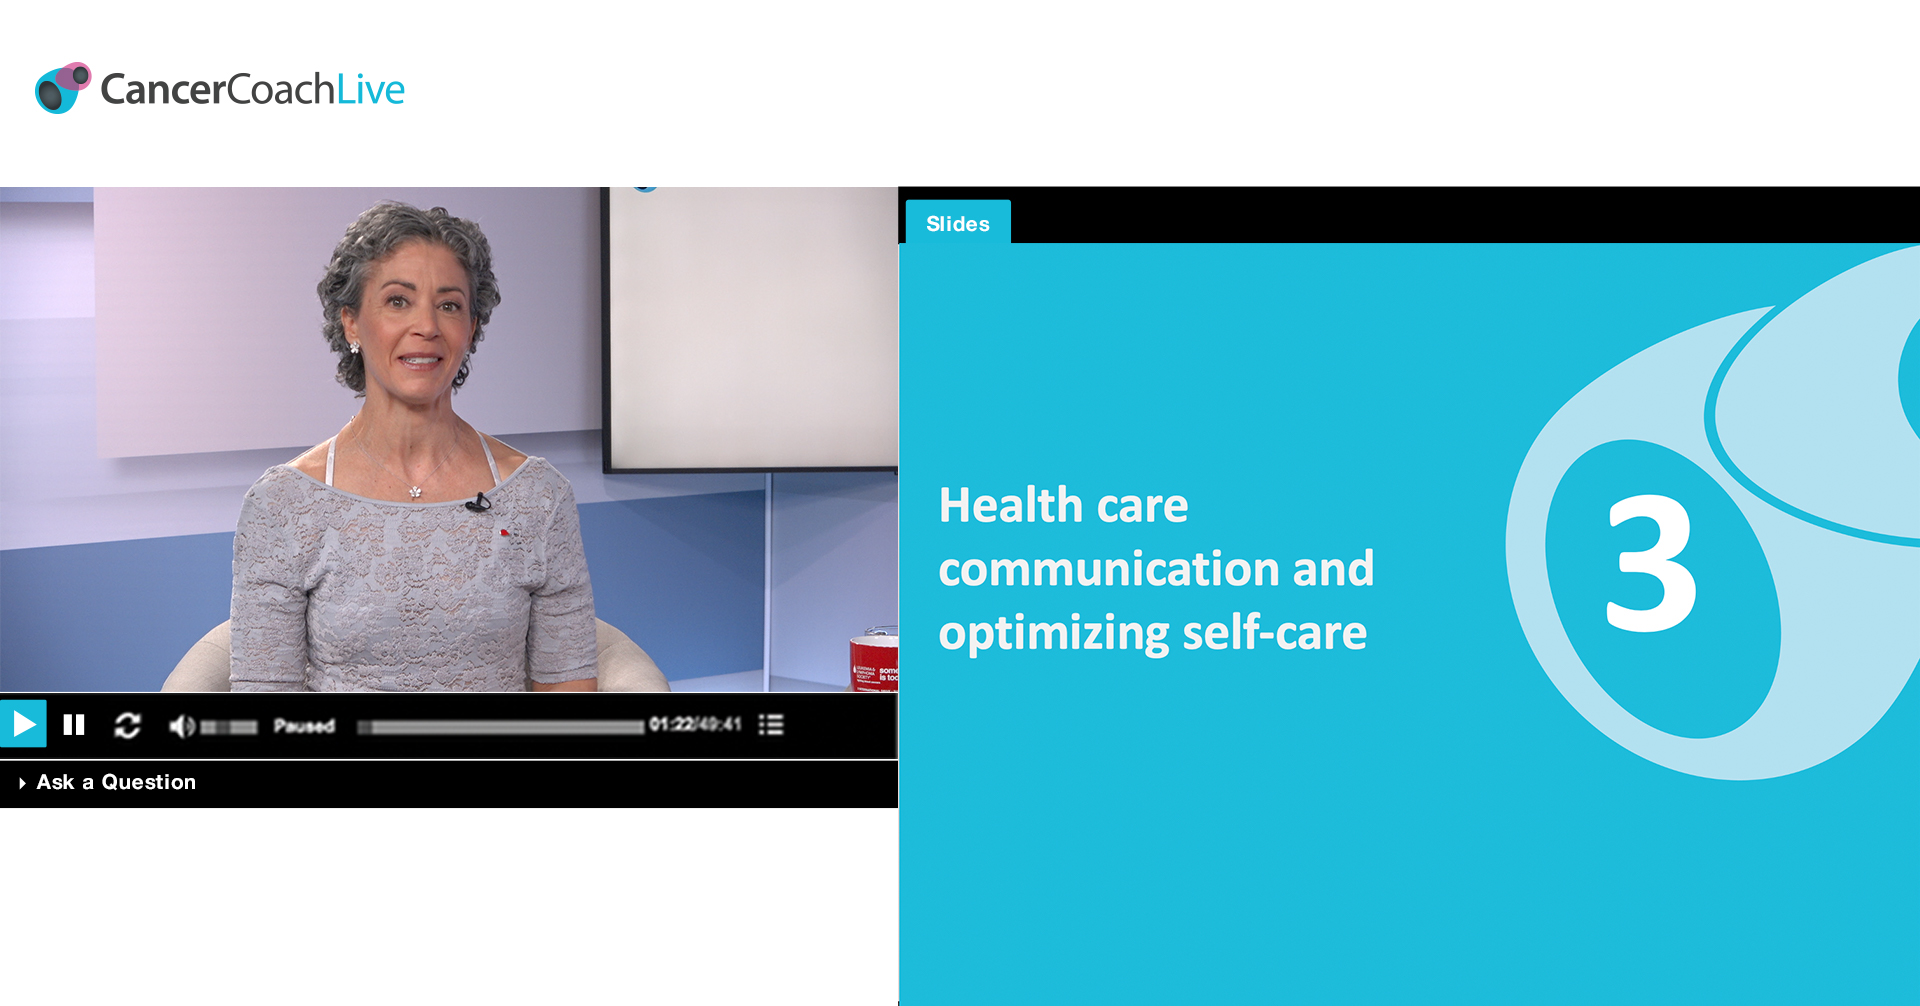 Chapter 3: Health care communication and optimizing self-care